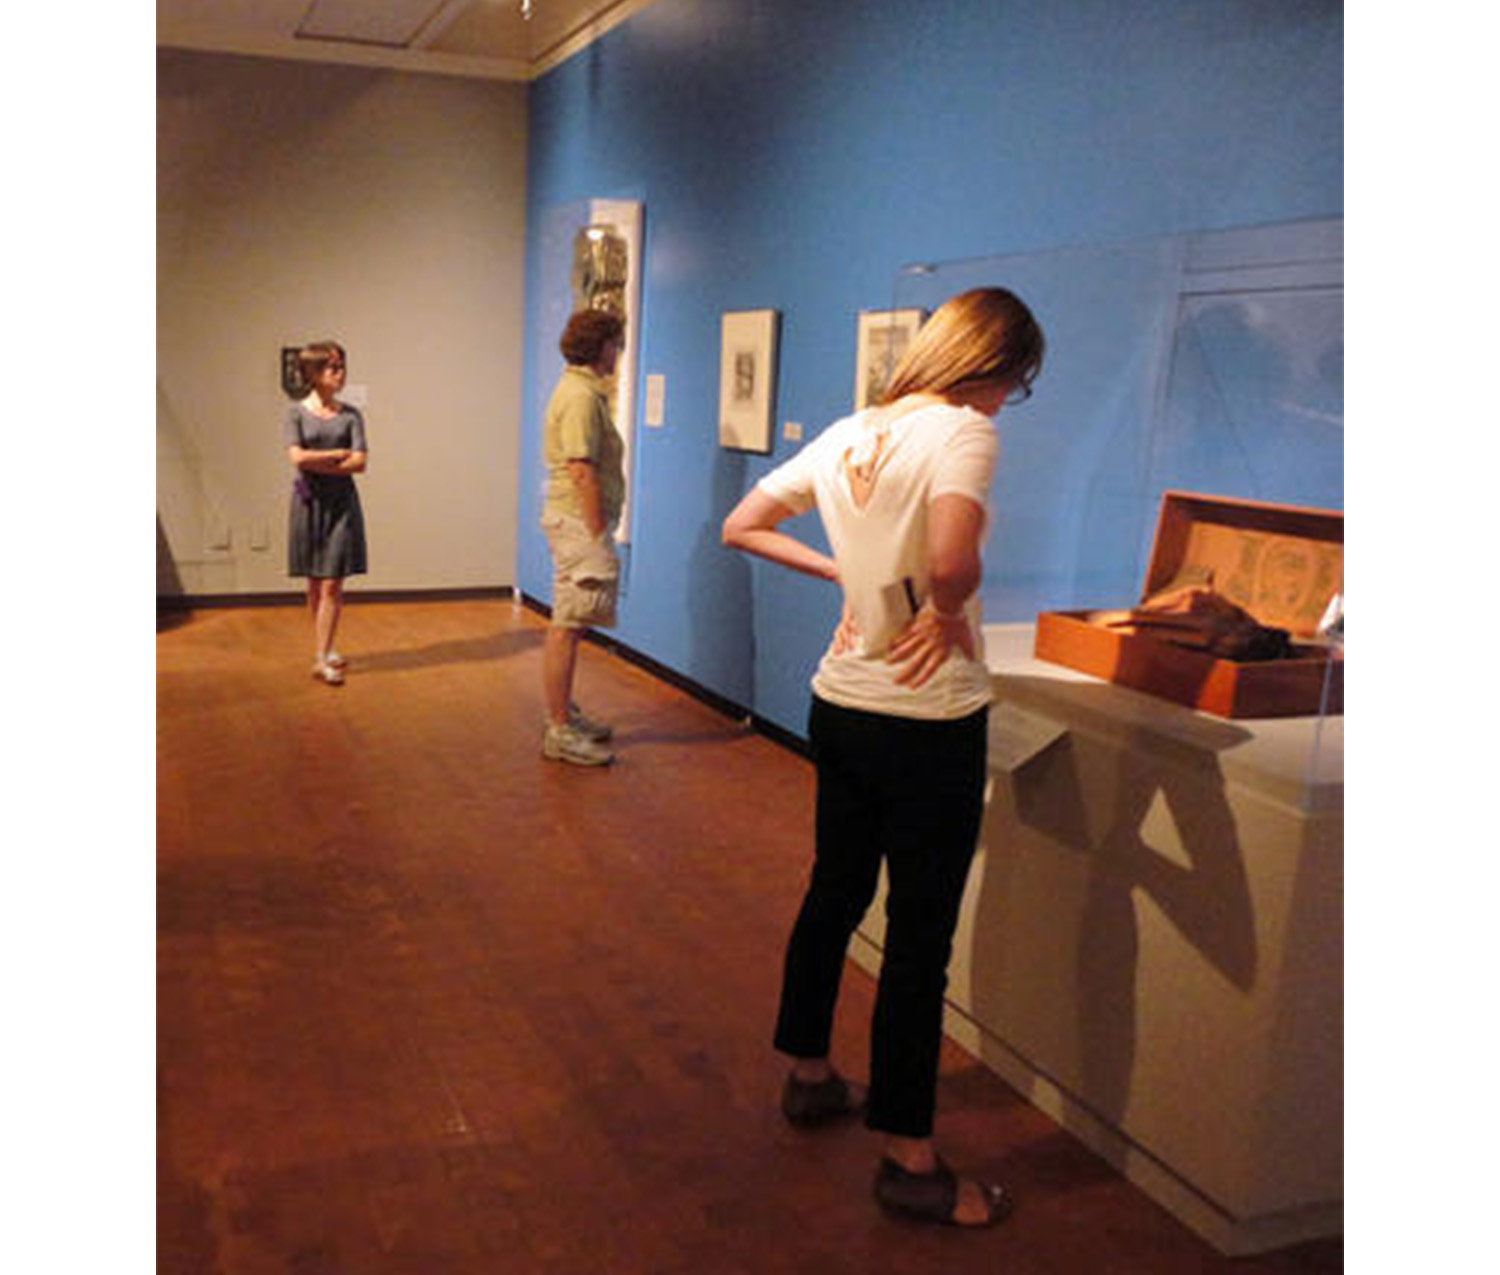 three people stand in an art gallery, looking at a wall painted blue with paintings and prints displayed and a display cabinet on the ground